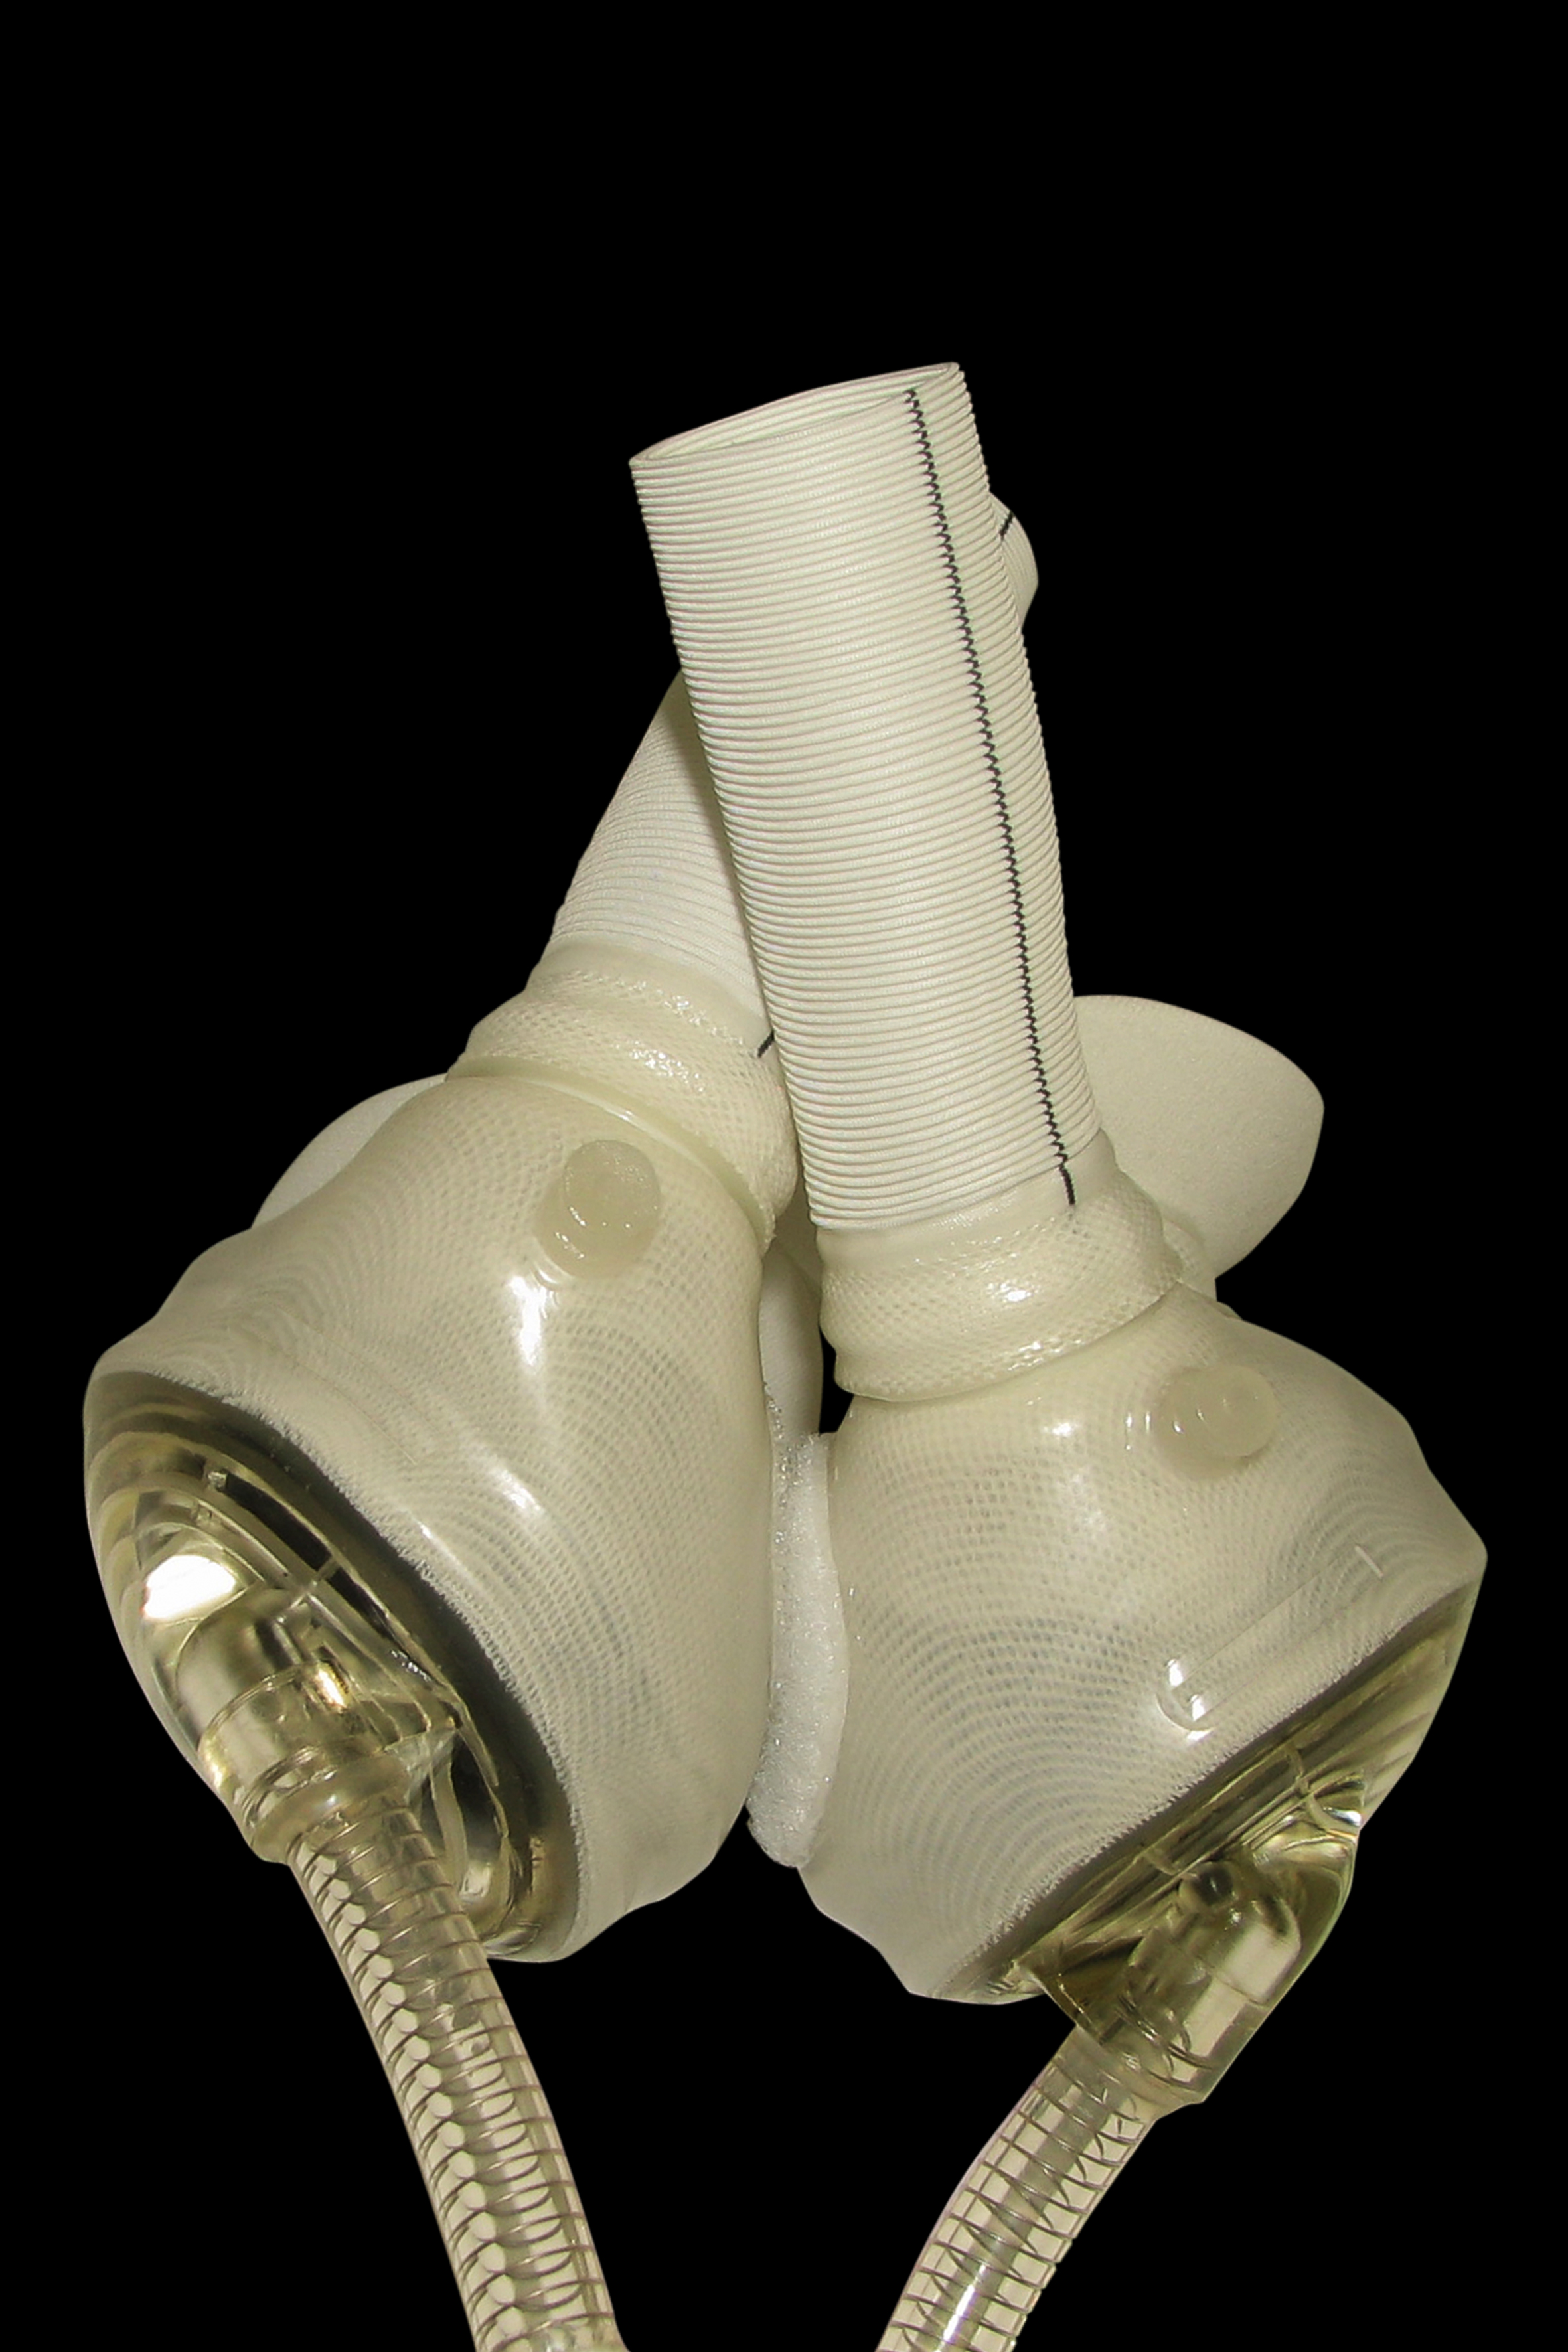 File:CardioWest™ temporary Total Artificial Heart.jpg